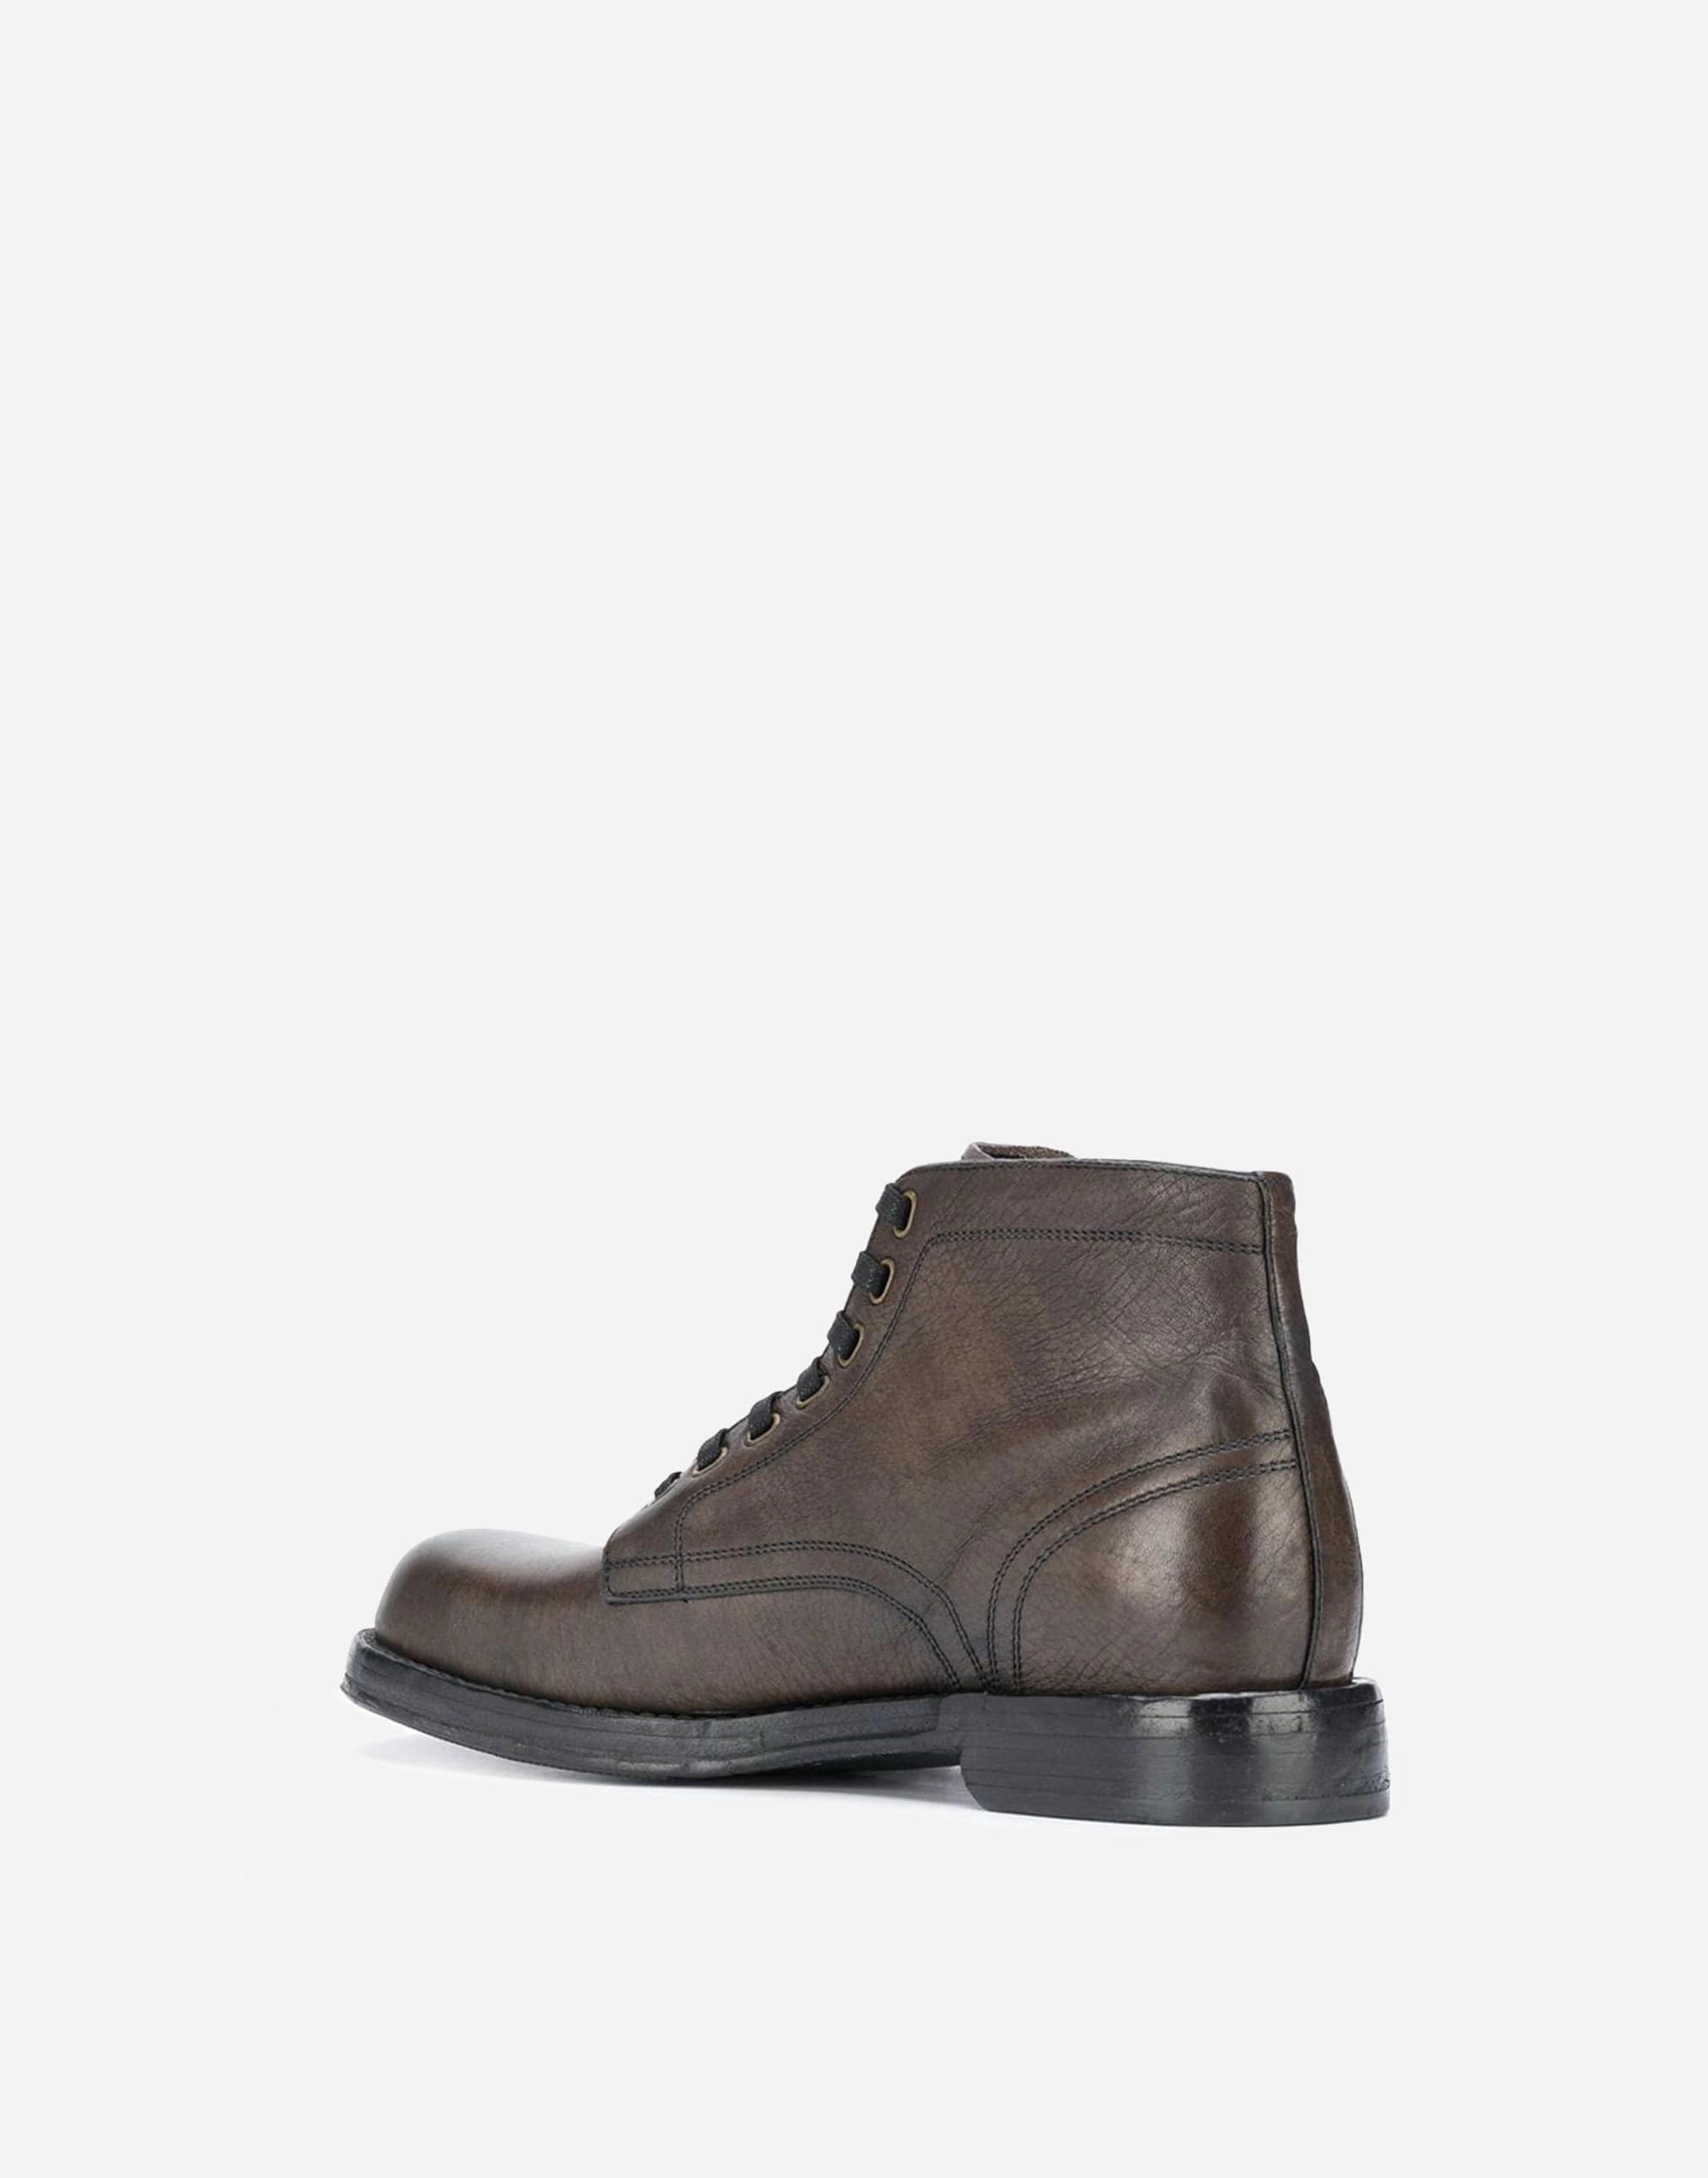 Dolce & Gabbana Perugino Leather Ankle Boots